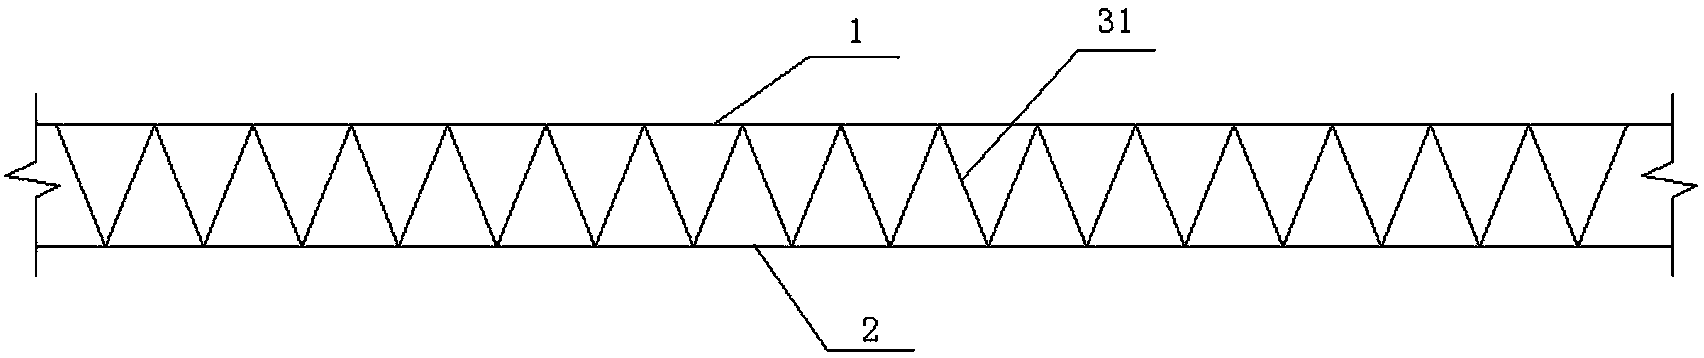 Double-steel-plate concrete combined shear wall connected through waveform reinforced bars